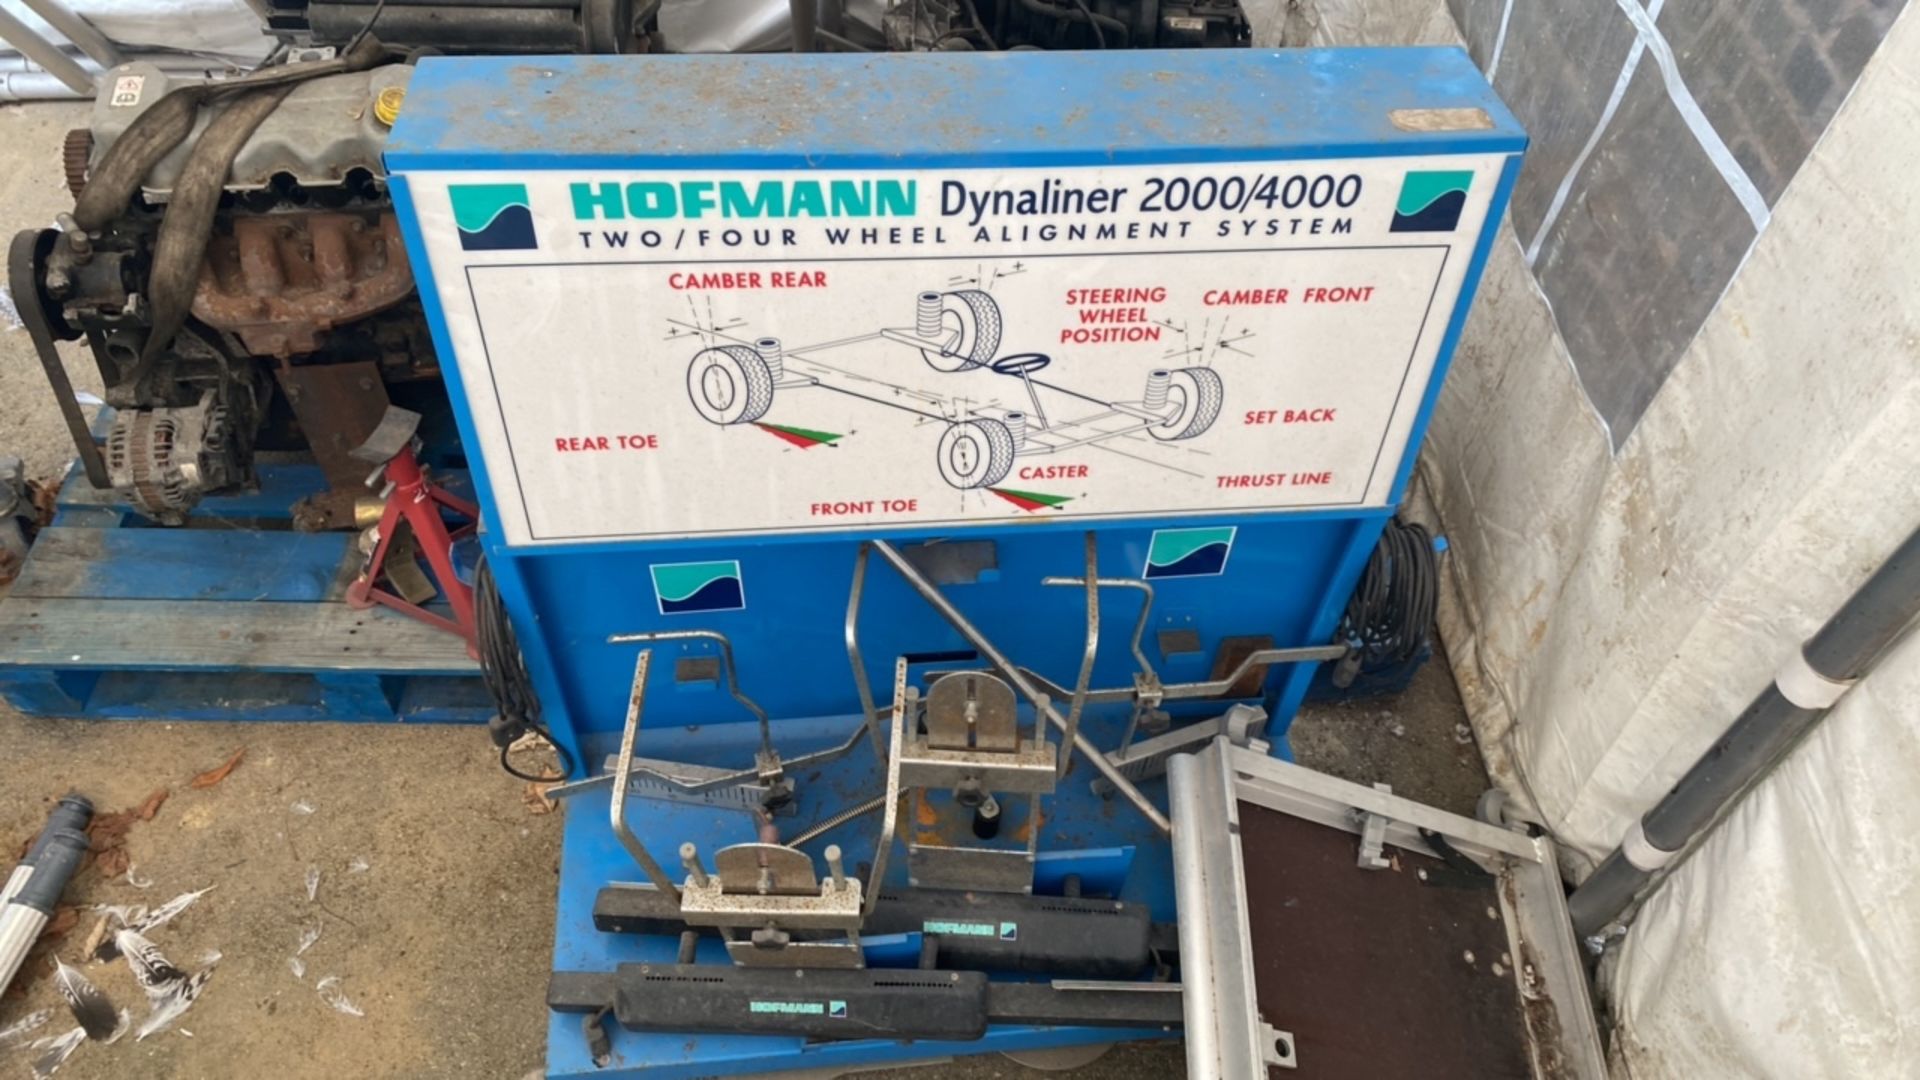 Hofmann Dynaliner 2000/4000 Two/Four Wheel Alignment System - Image 2 of 3